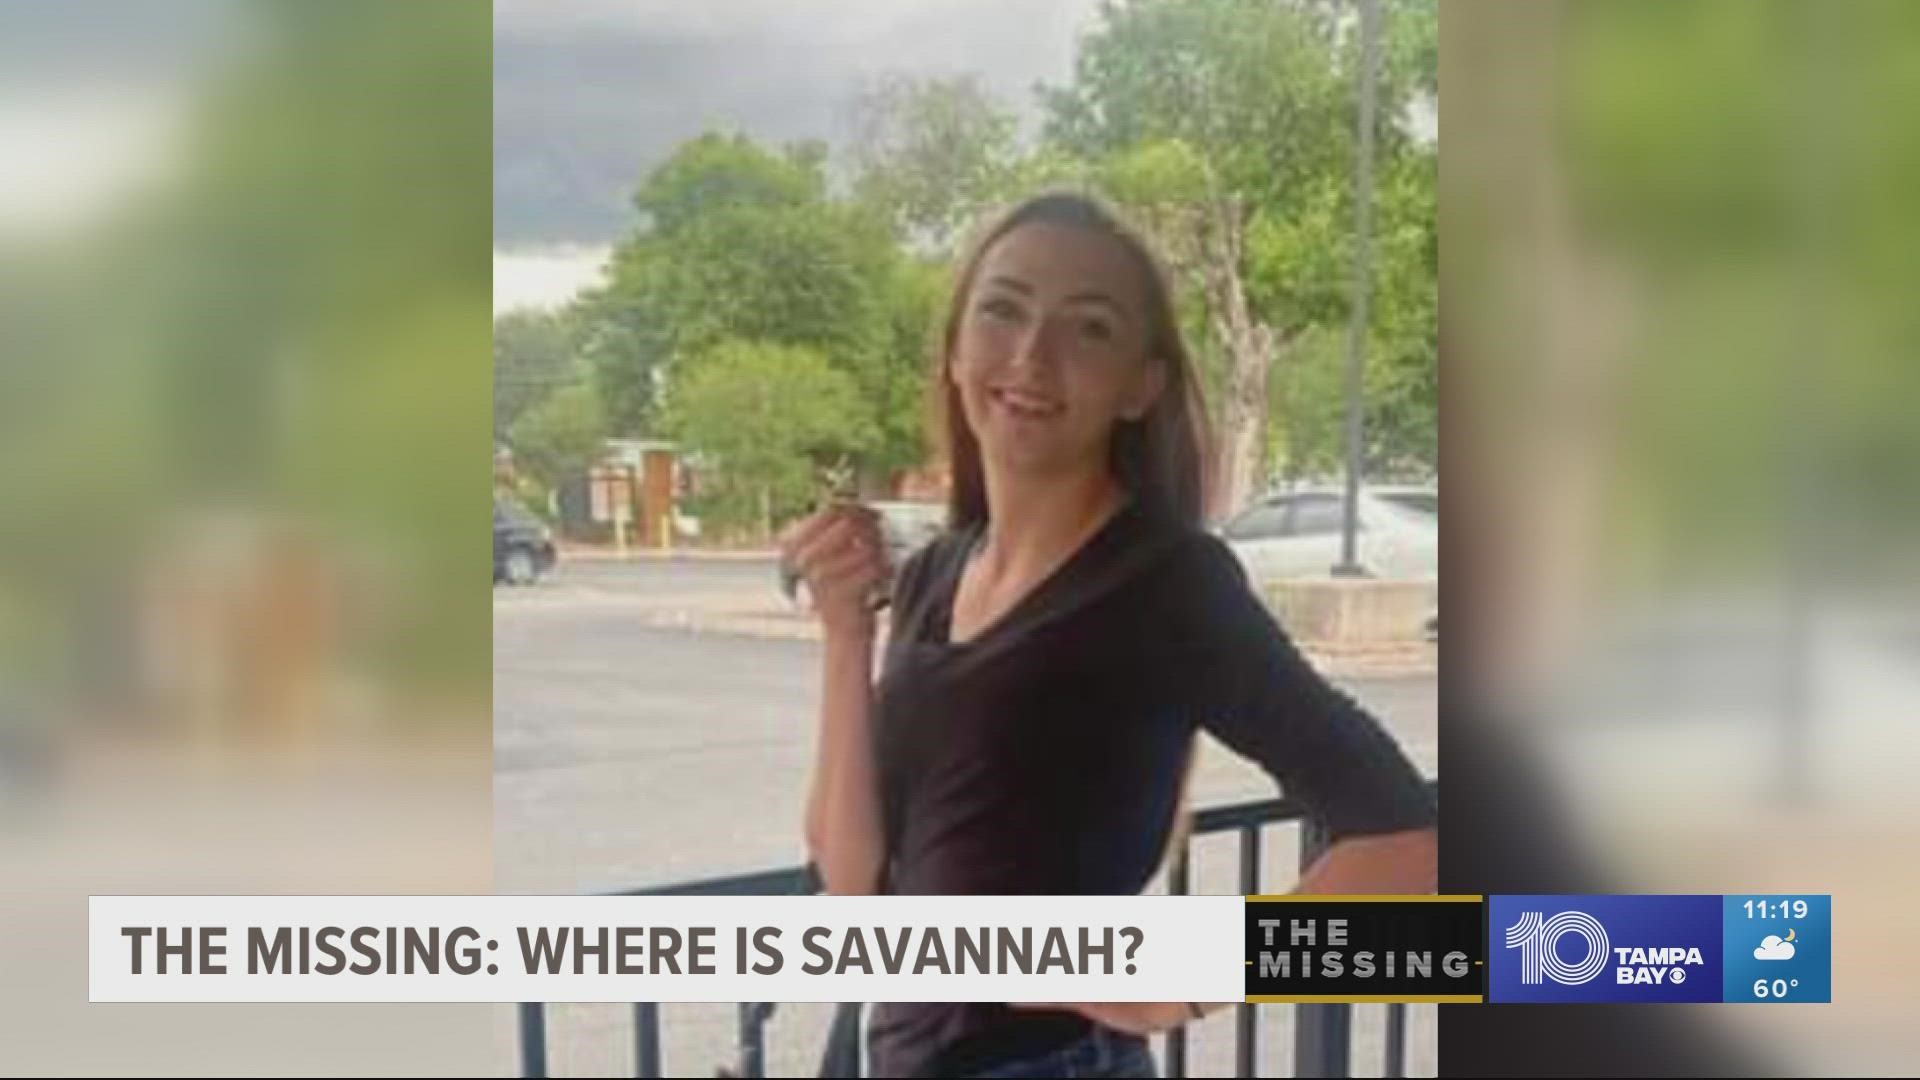 It's been 10 months since Savannah's mother last saw her.